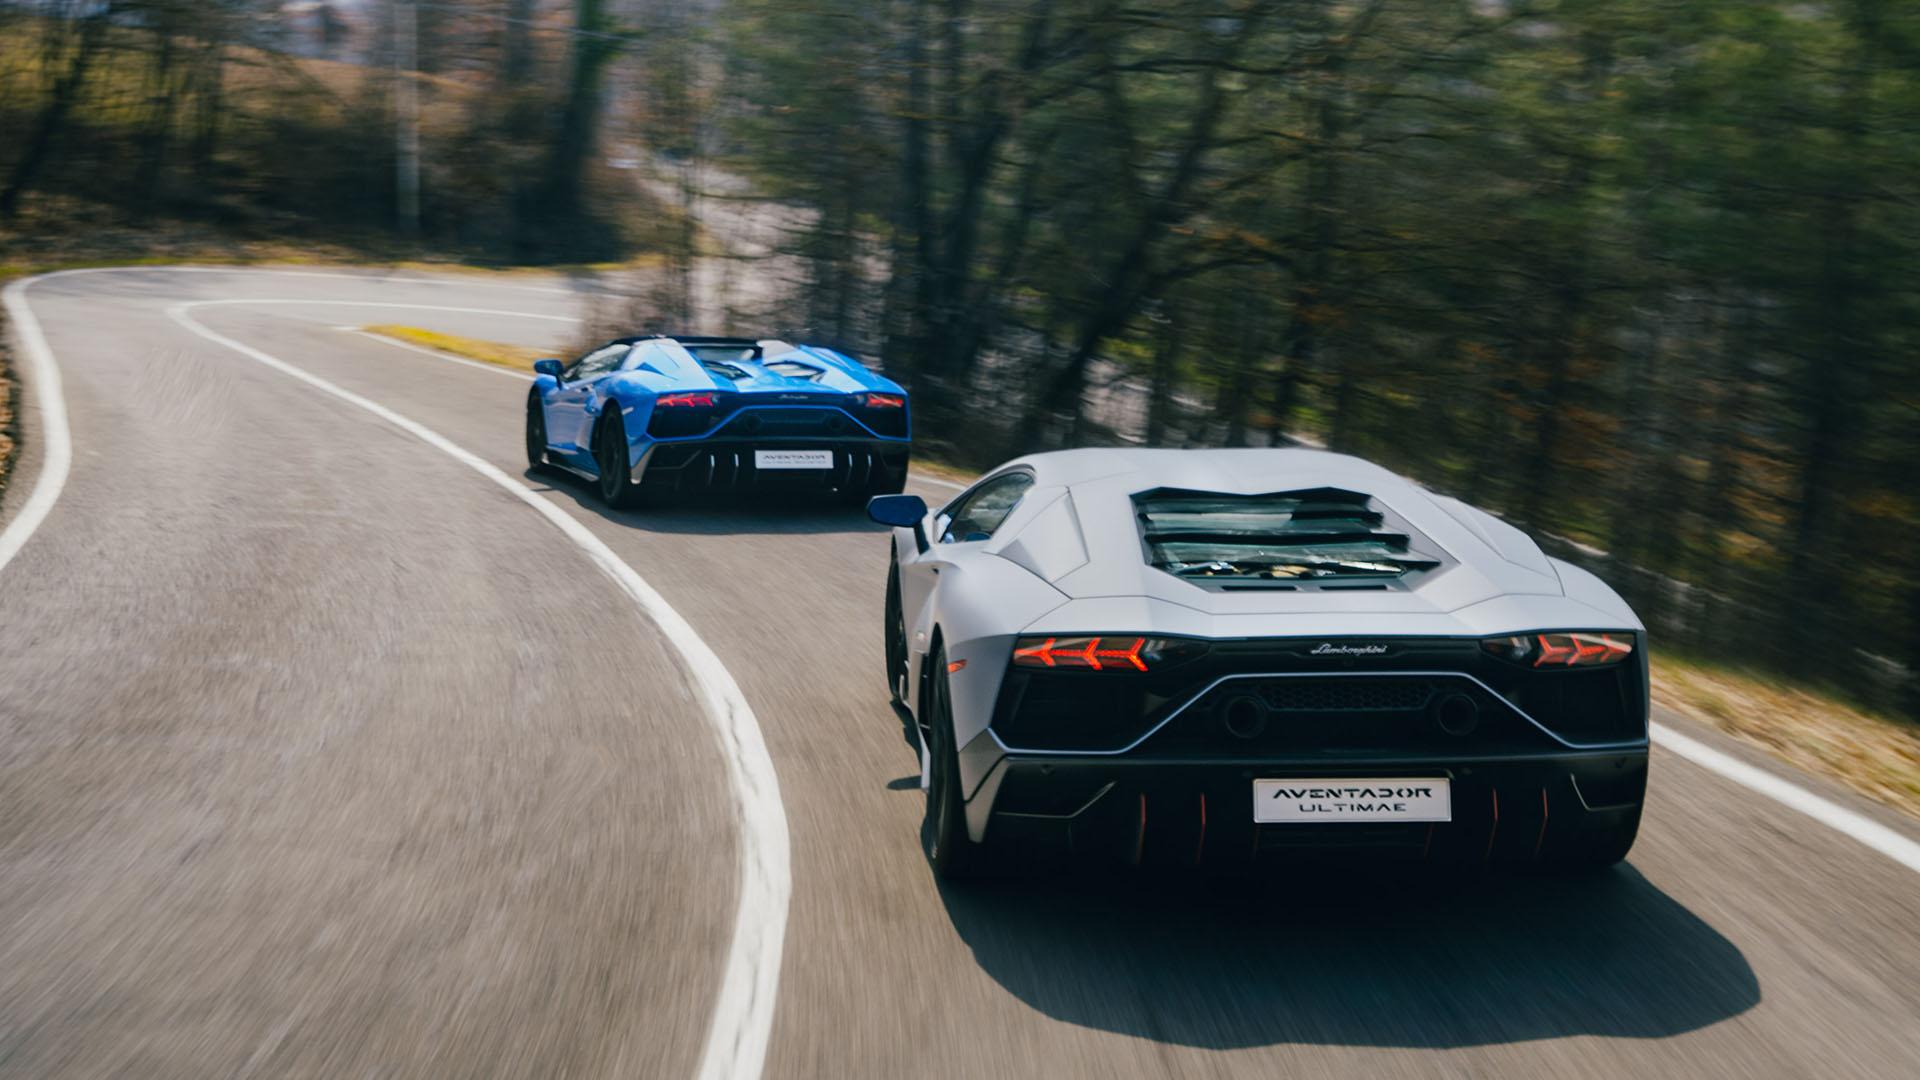 Aventador ultimae on the road 8